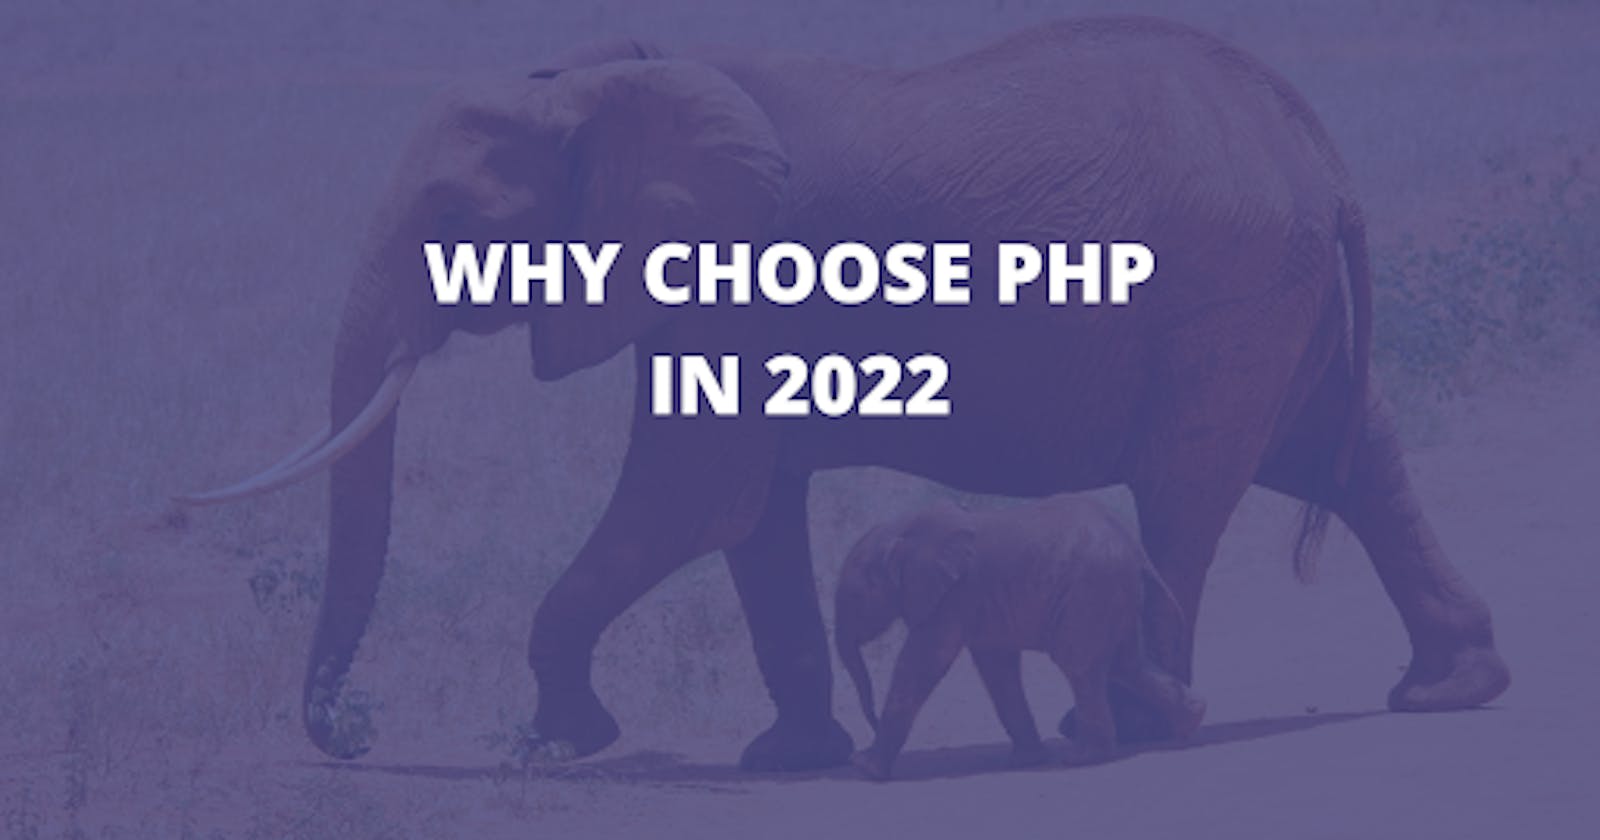 9 Reasons to Use PhP In 2022.